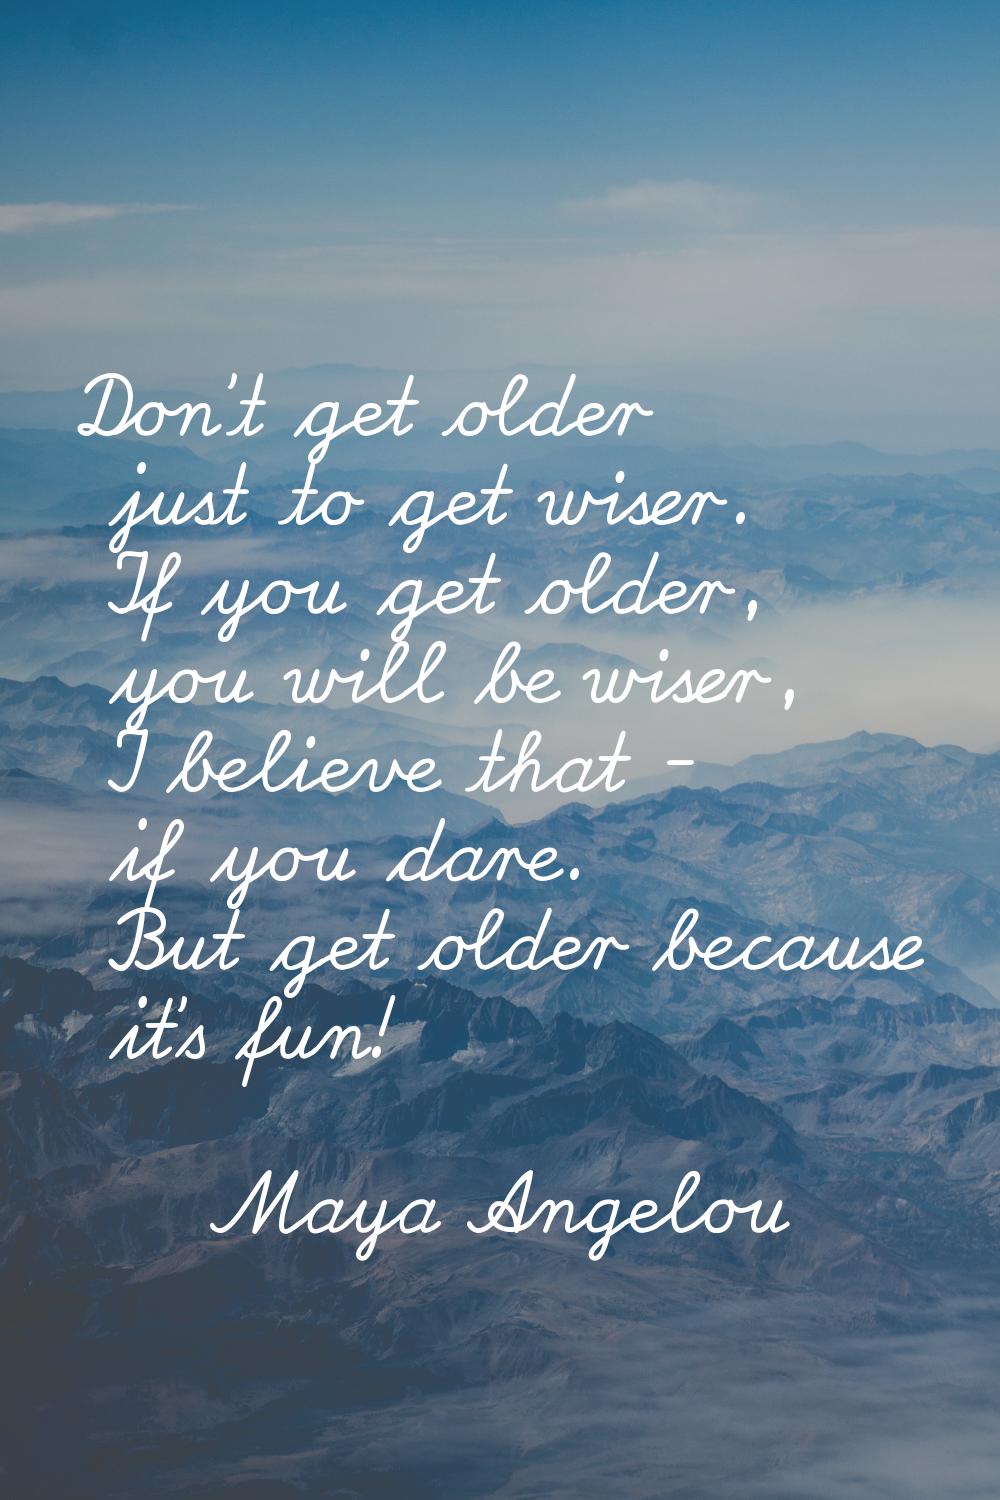 Don't get older just to get wiser. If you get older, you will be wiser, I believe that - if you dar